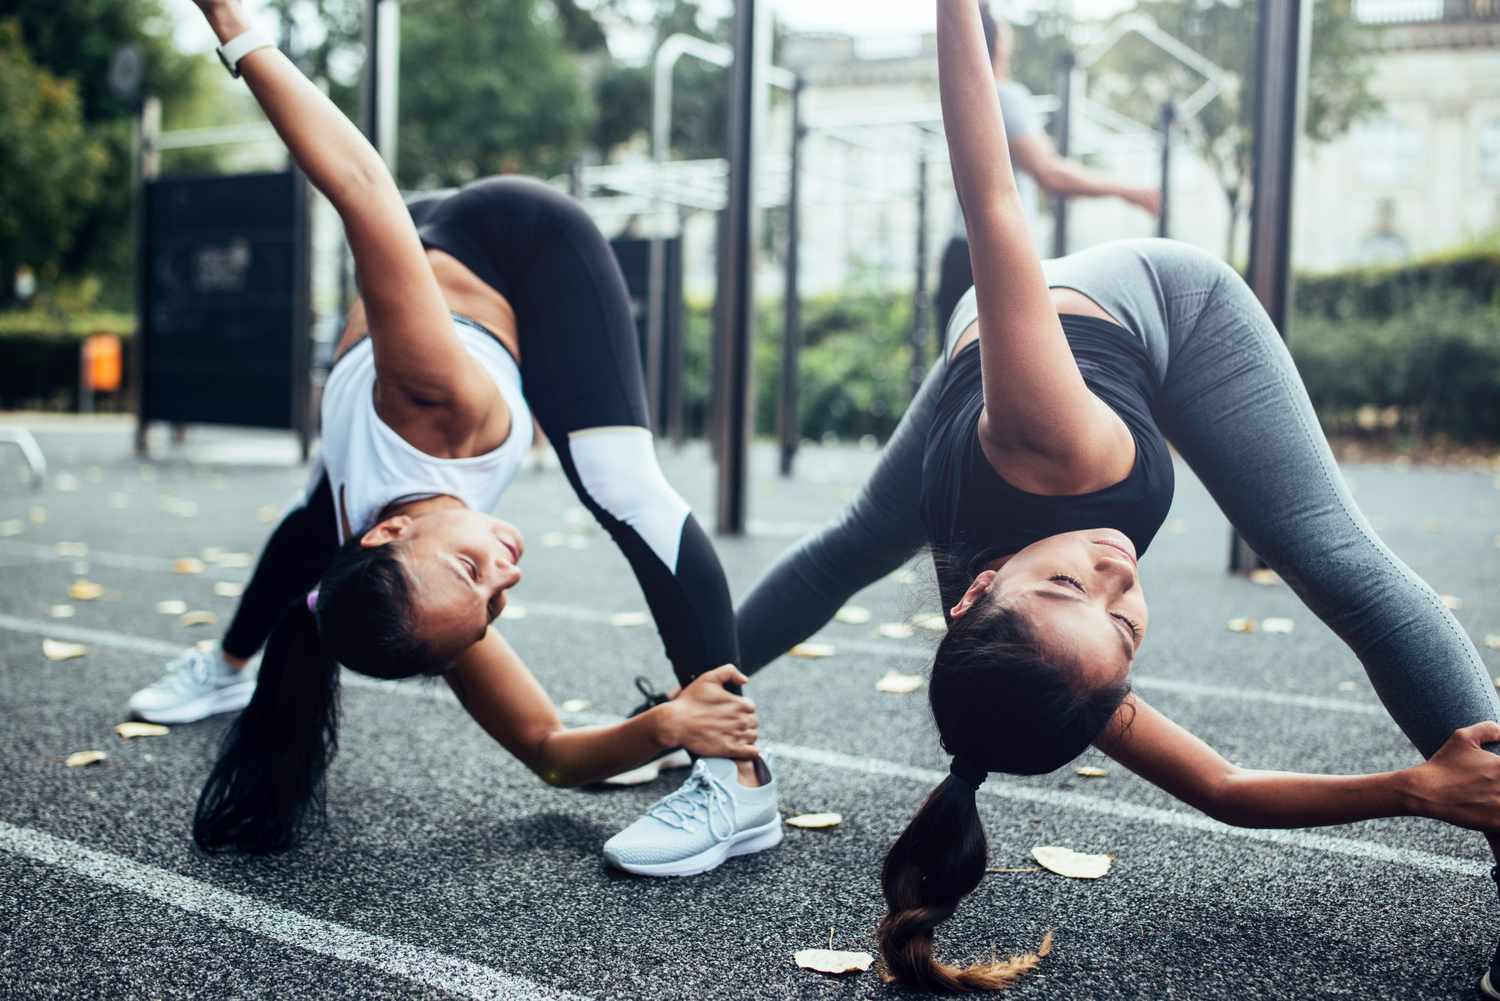 two women doing workout warm-up exercises at a playground